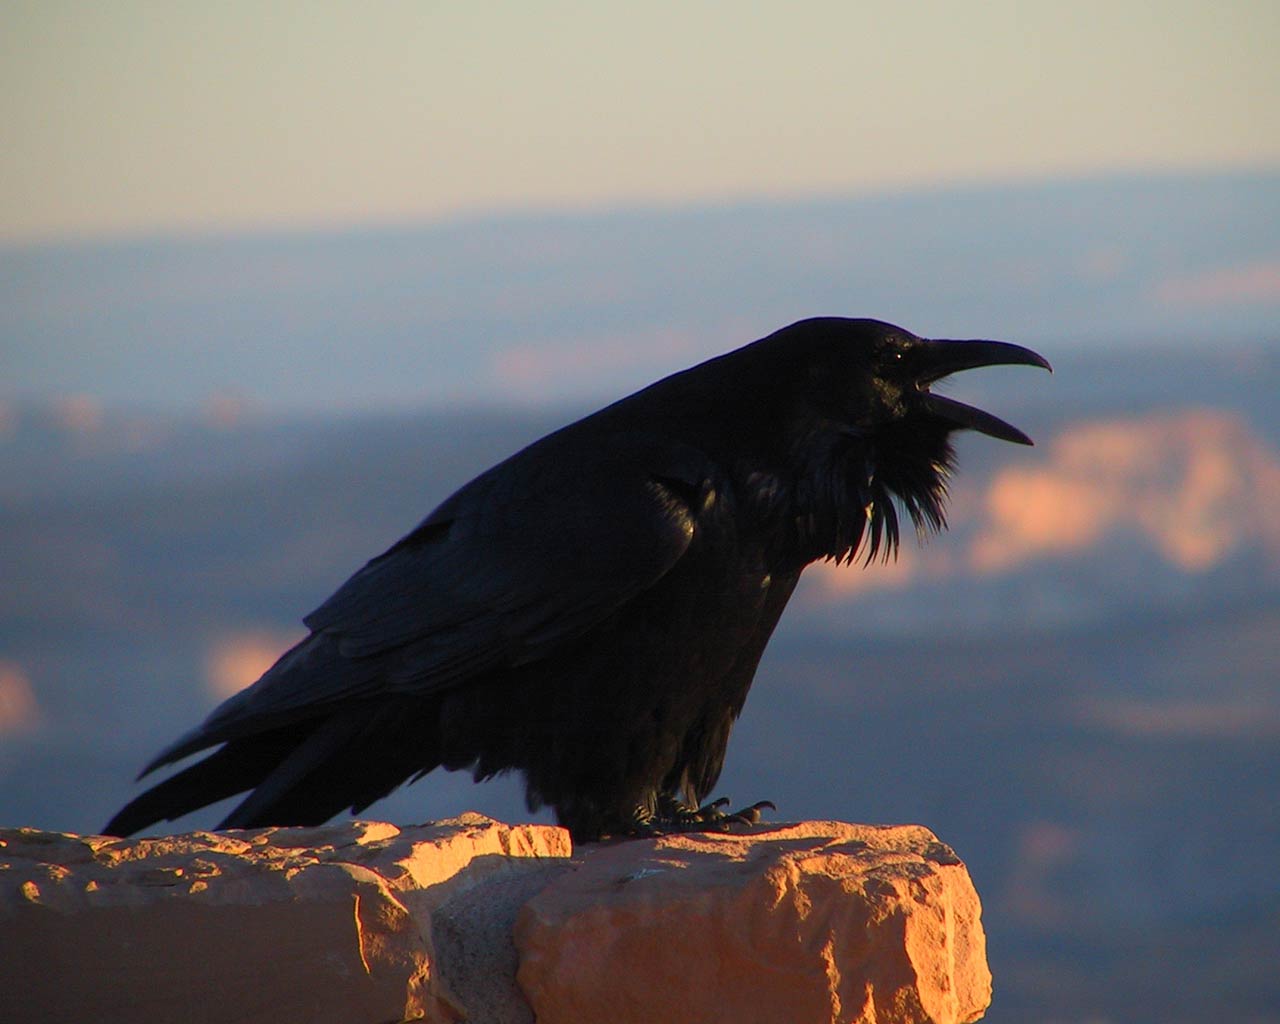 Cawing Raven on a rock wallpaper